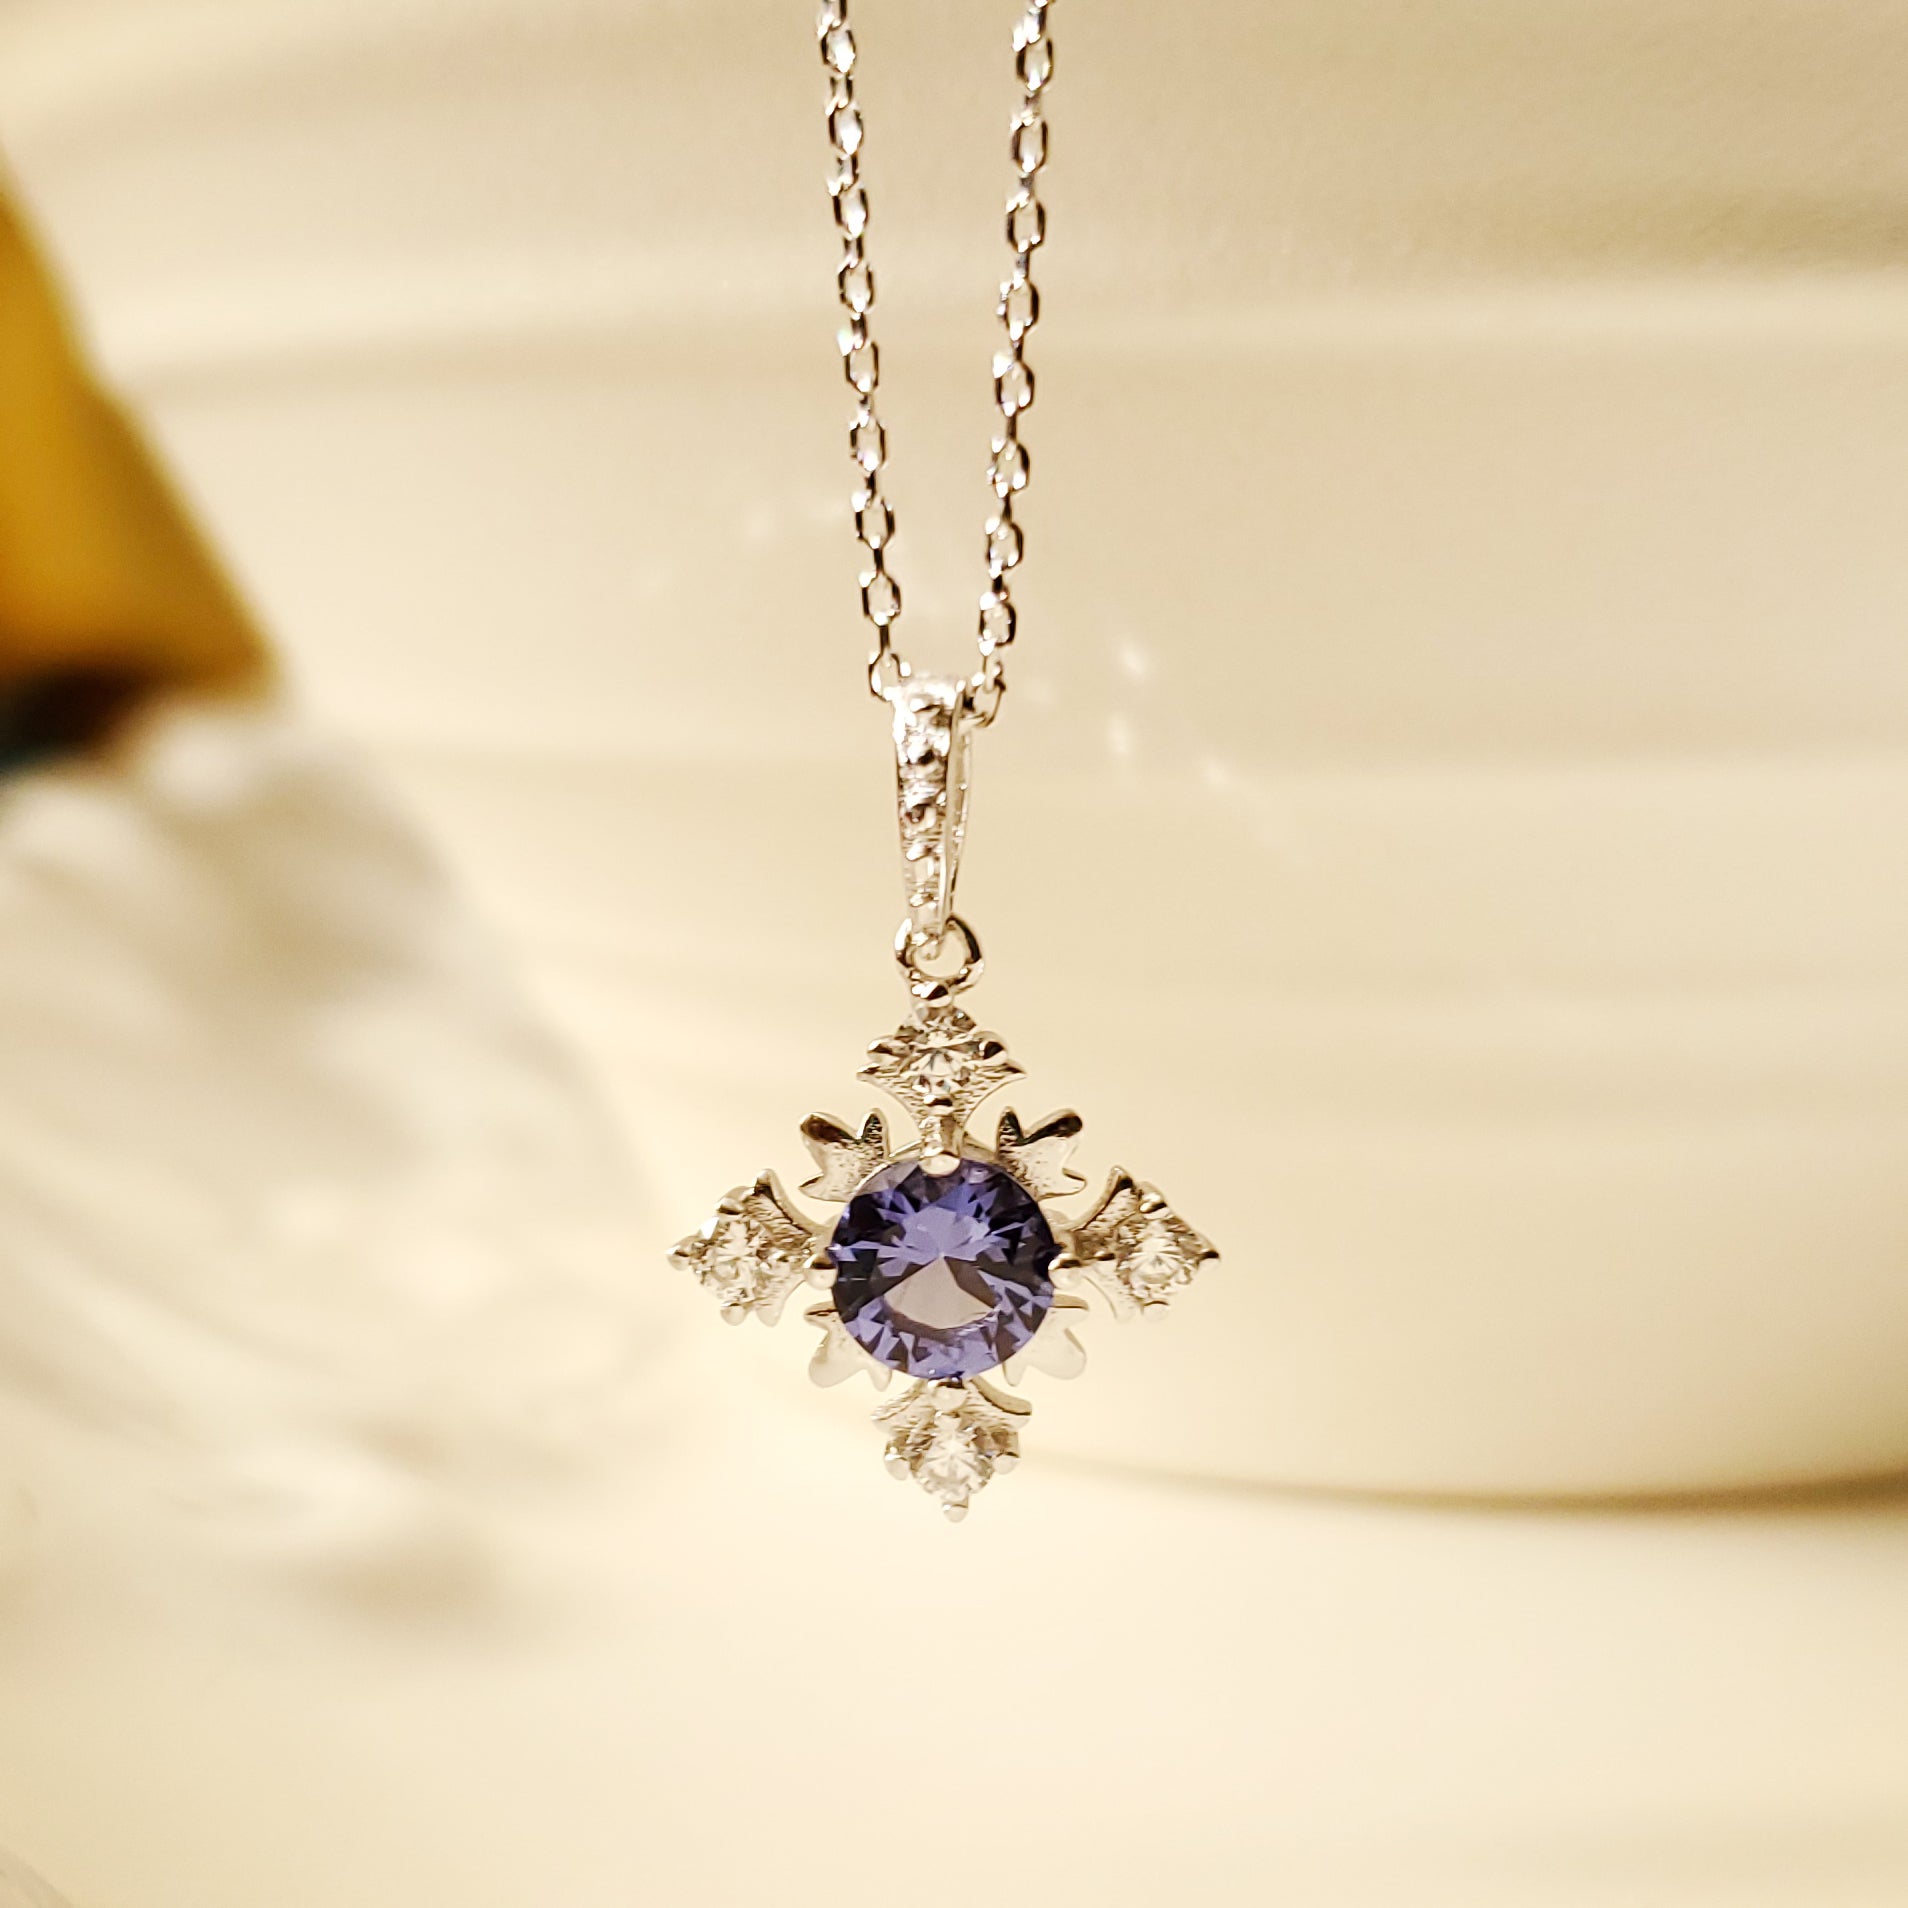 Women's Rhodium Plated 925 Sterling Silver Gemstone Snowflake Necklace